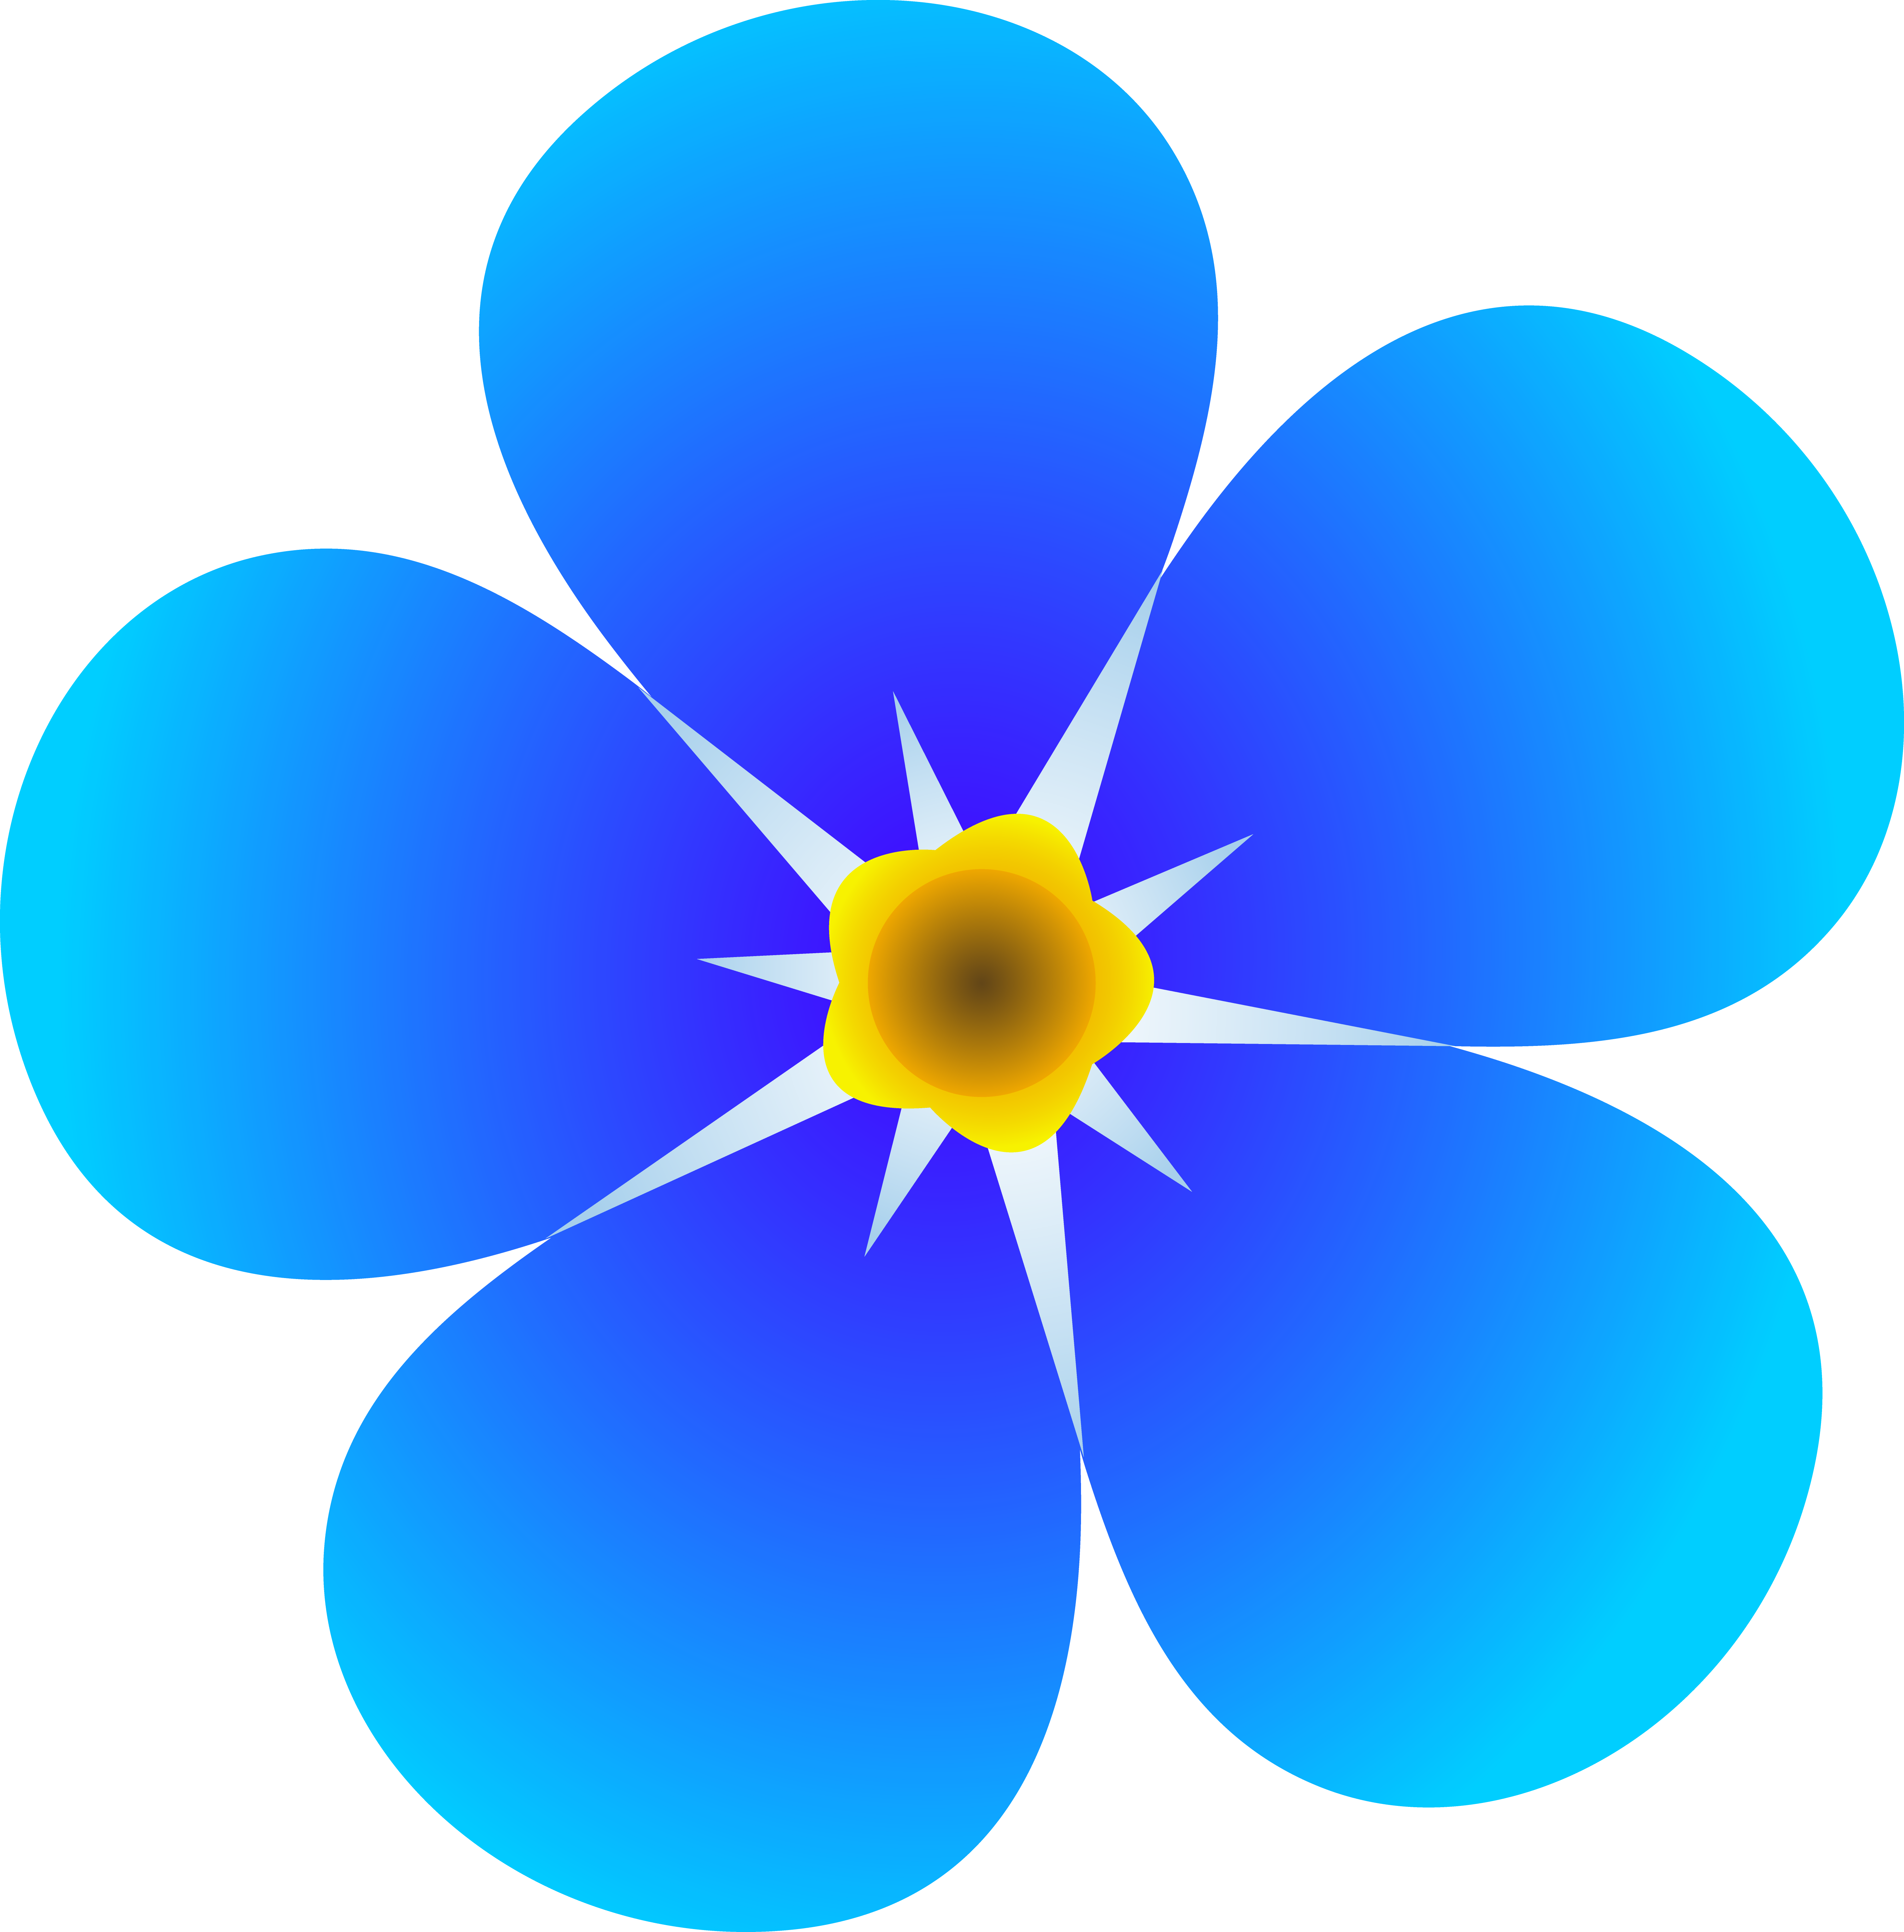 Single Flower With Vector - ClipArt Best